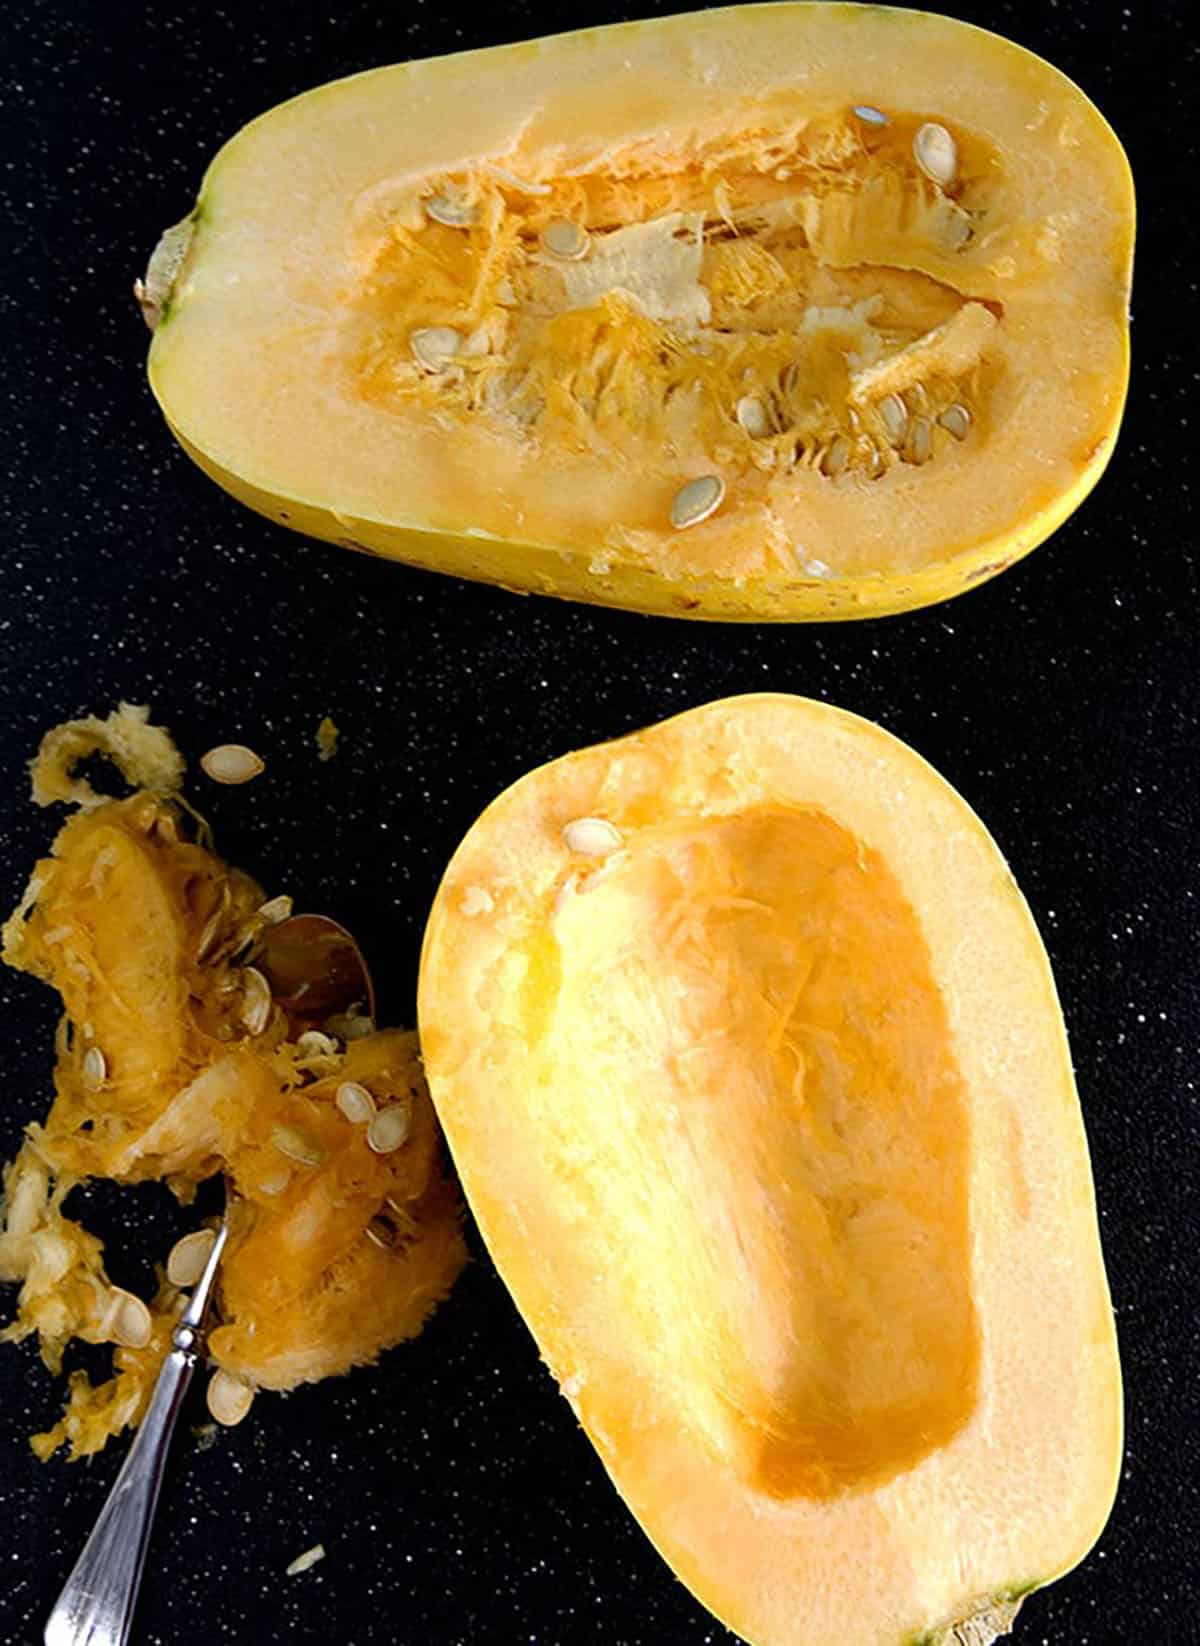 Seeds have been scooped out of half a squash.